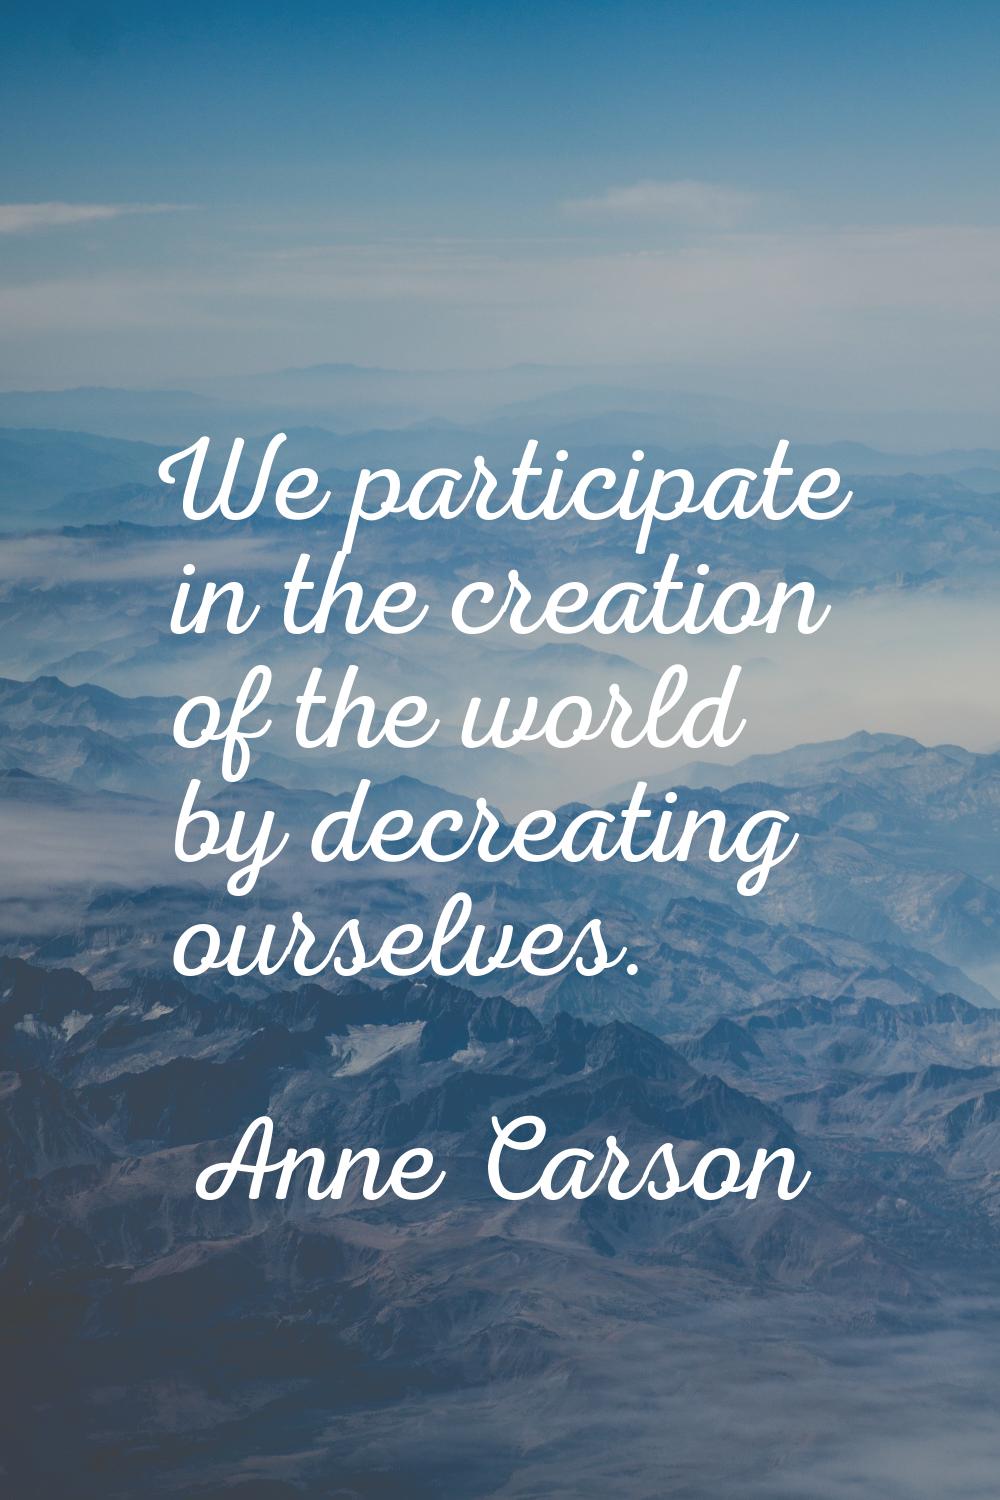 We participate in the creation of the world by decreating ourselves.